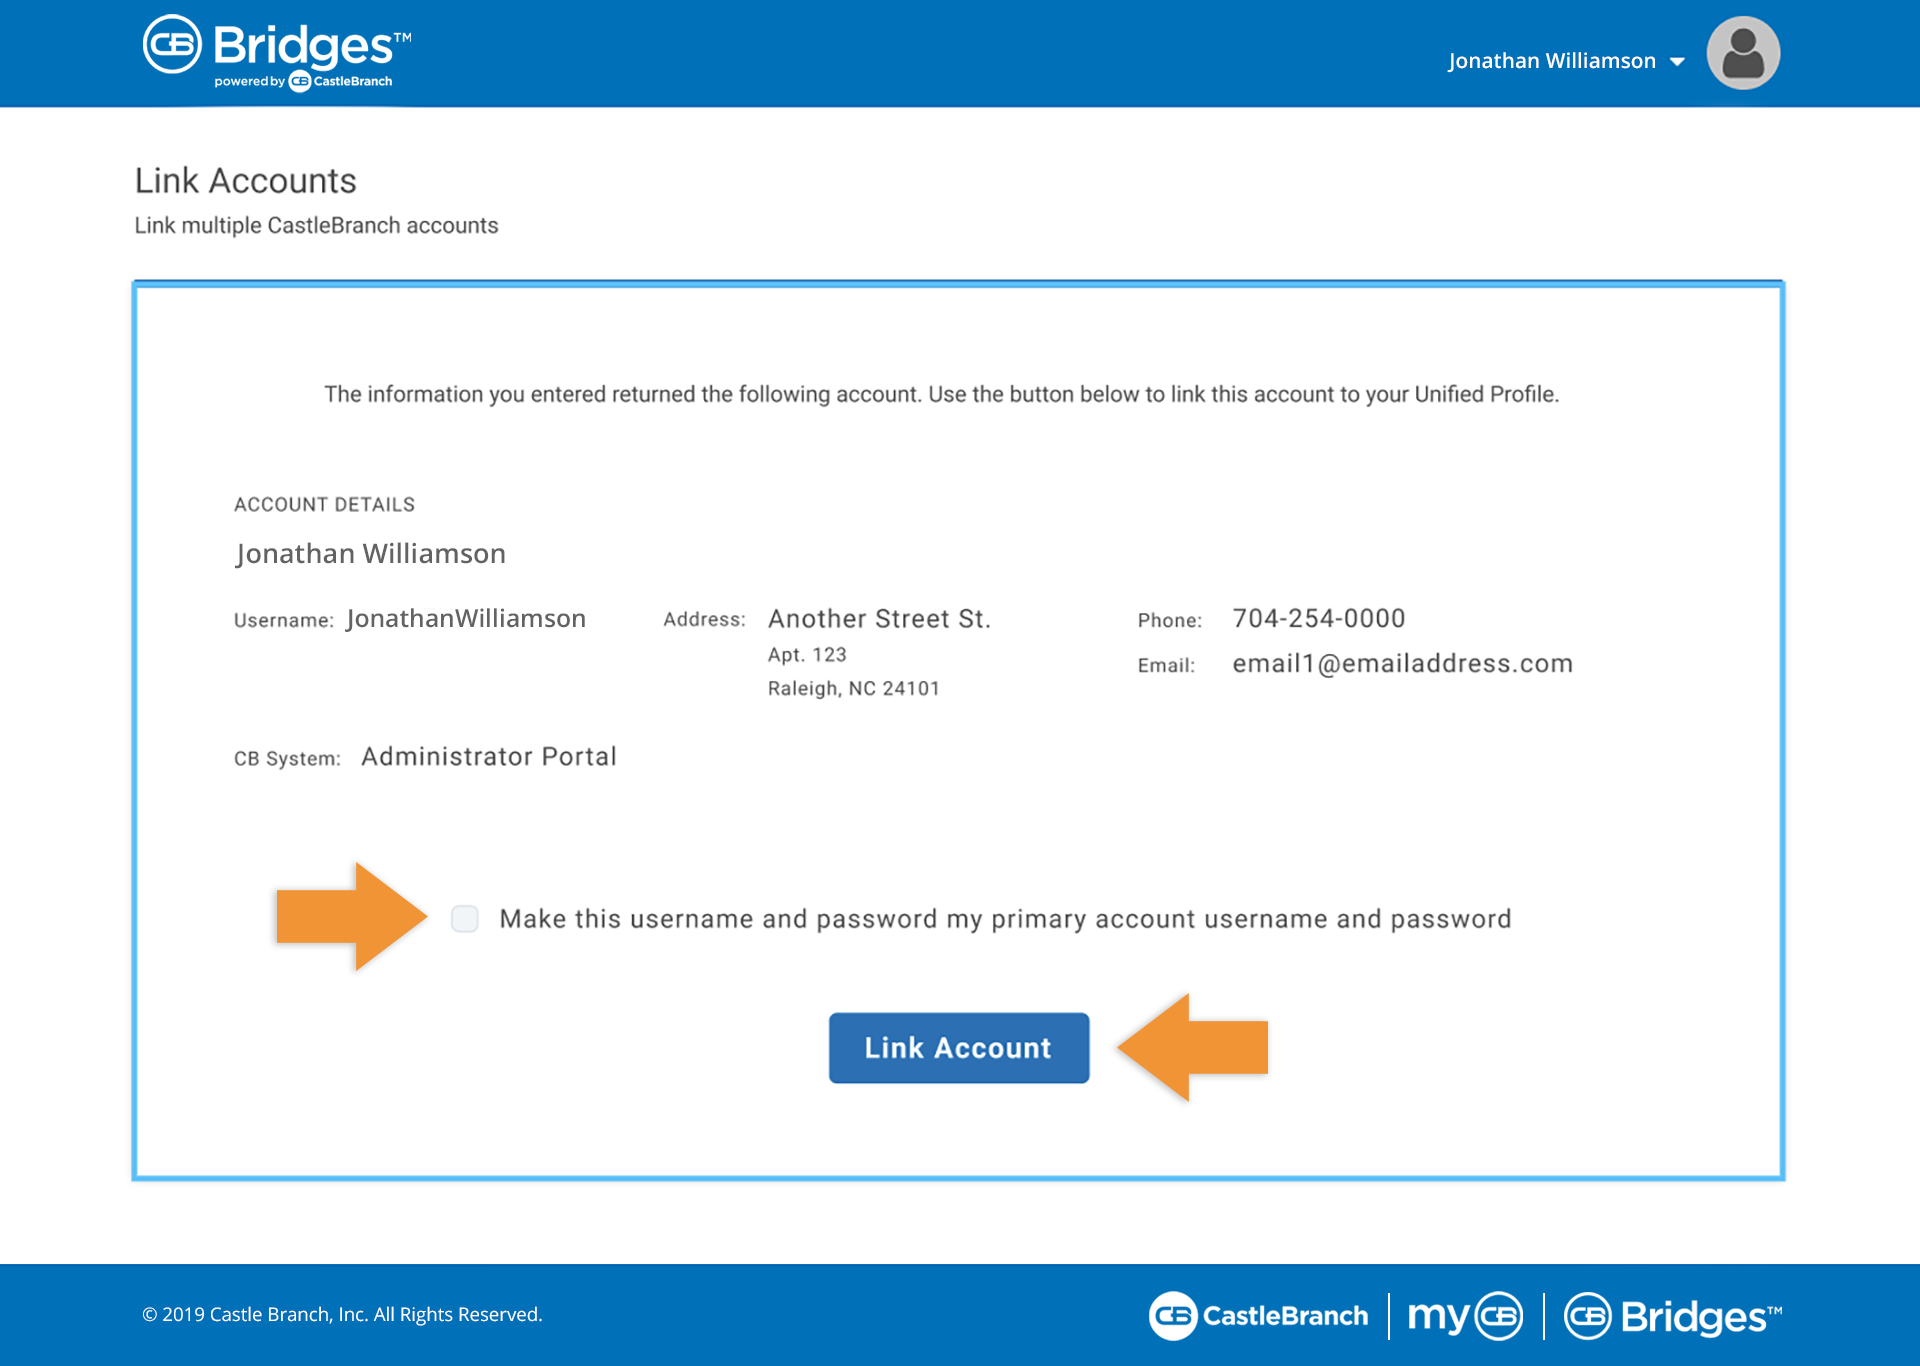 CastleBranch Simple Sign in Process–Link Existing CastleBranch Accounts: Link Accounts checkbox to make selected username as the primary sign-in credentials.